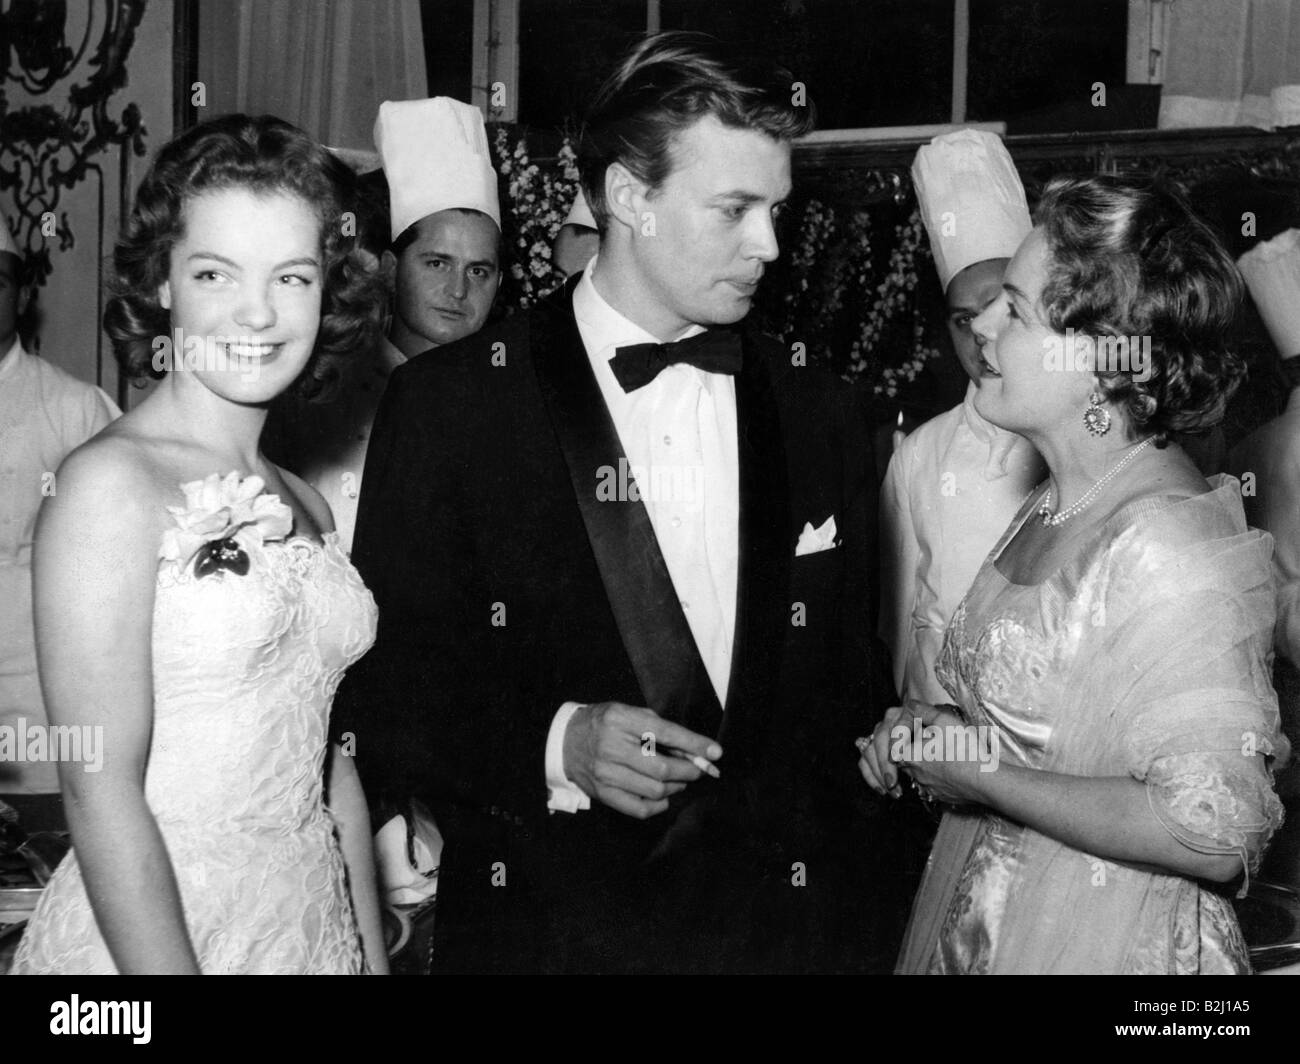 Schneider, Romy, 23.9.1938 - 29.5.1982, German actress, half length, with Karlheinz Böhm and her mother Magda Schneider, at a reception, 1950s, Stock Photo